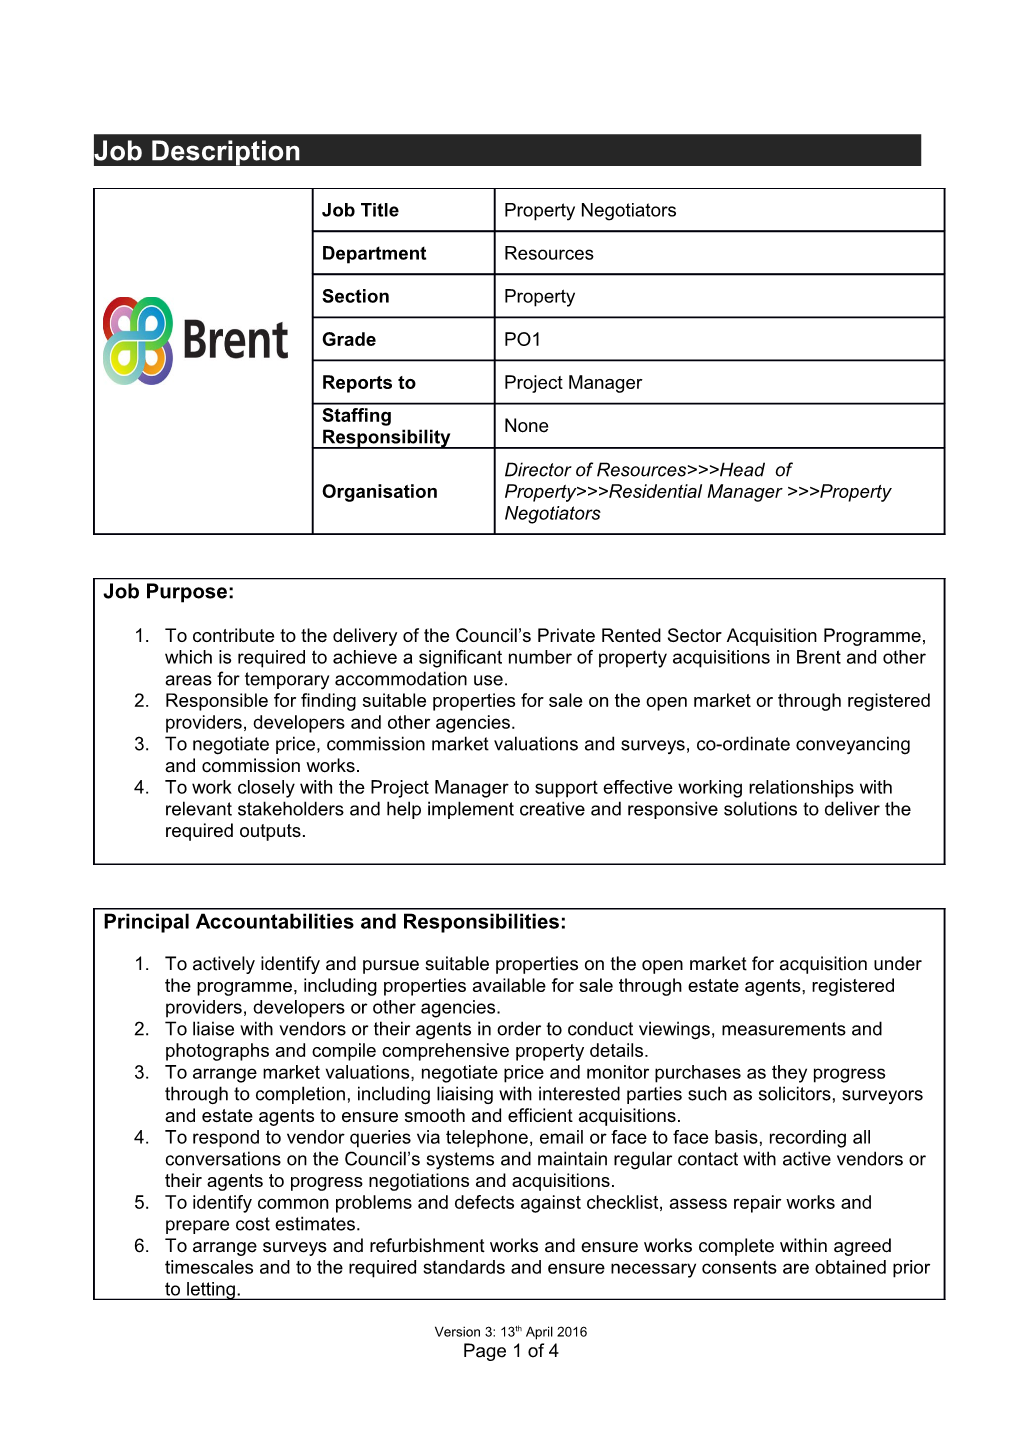 Application for Job Evaluation s1